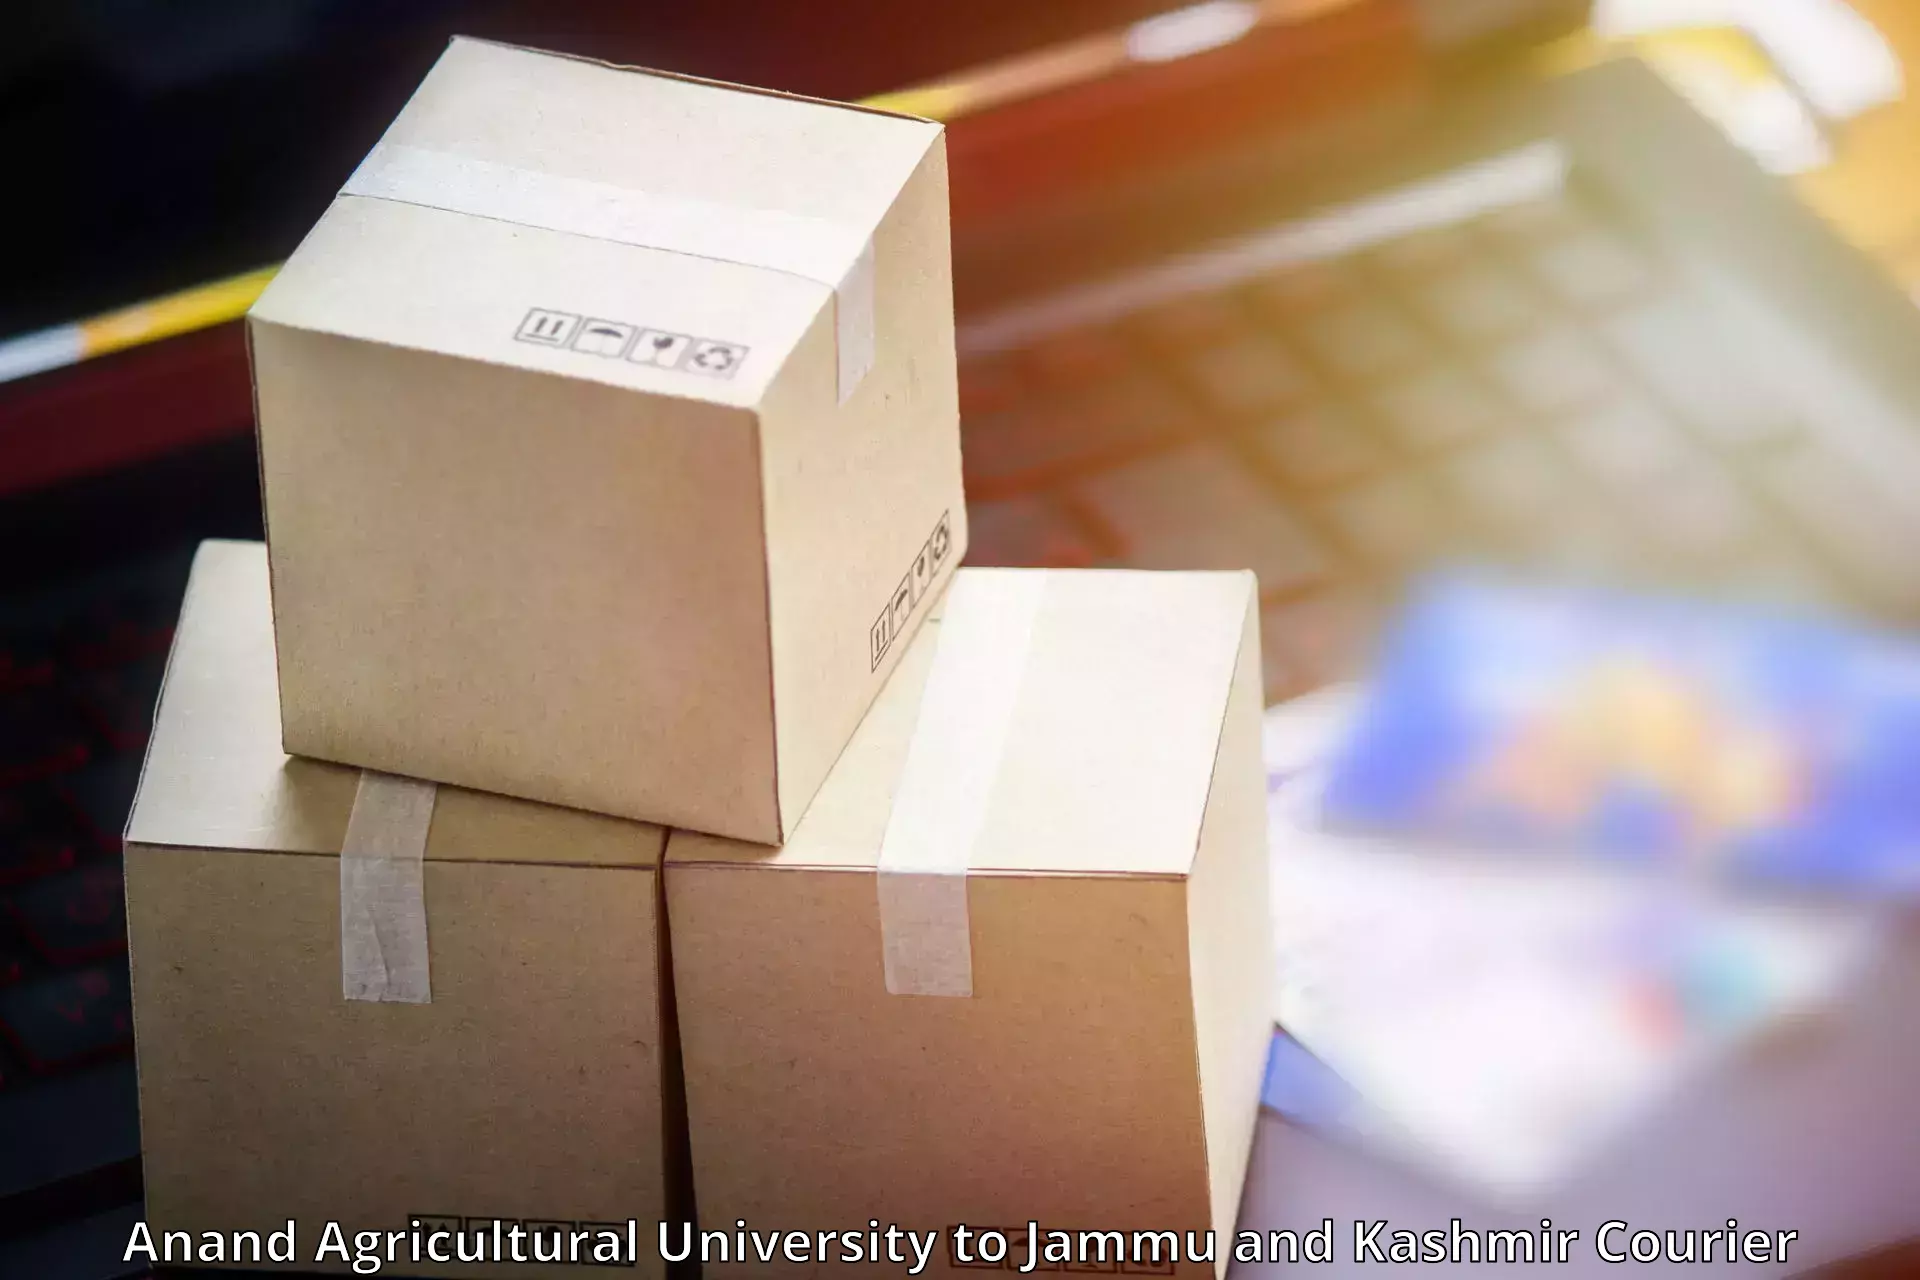 Secure packaging Anand Agricultural University to Jammu and Kashmir